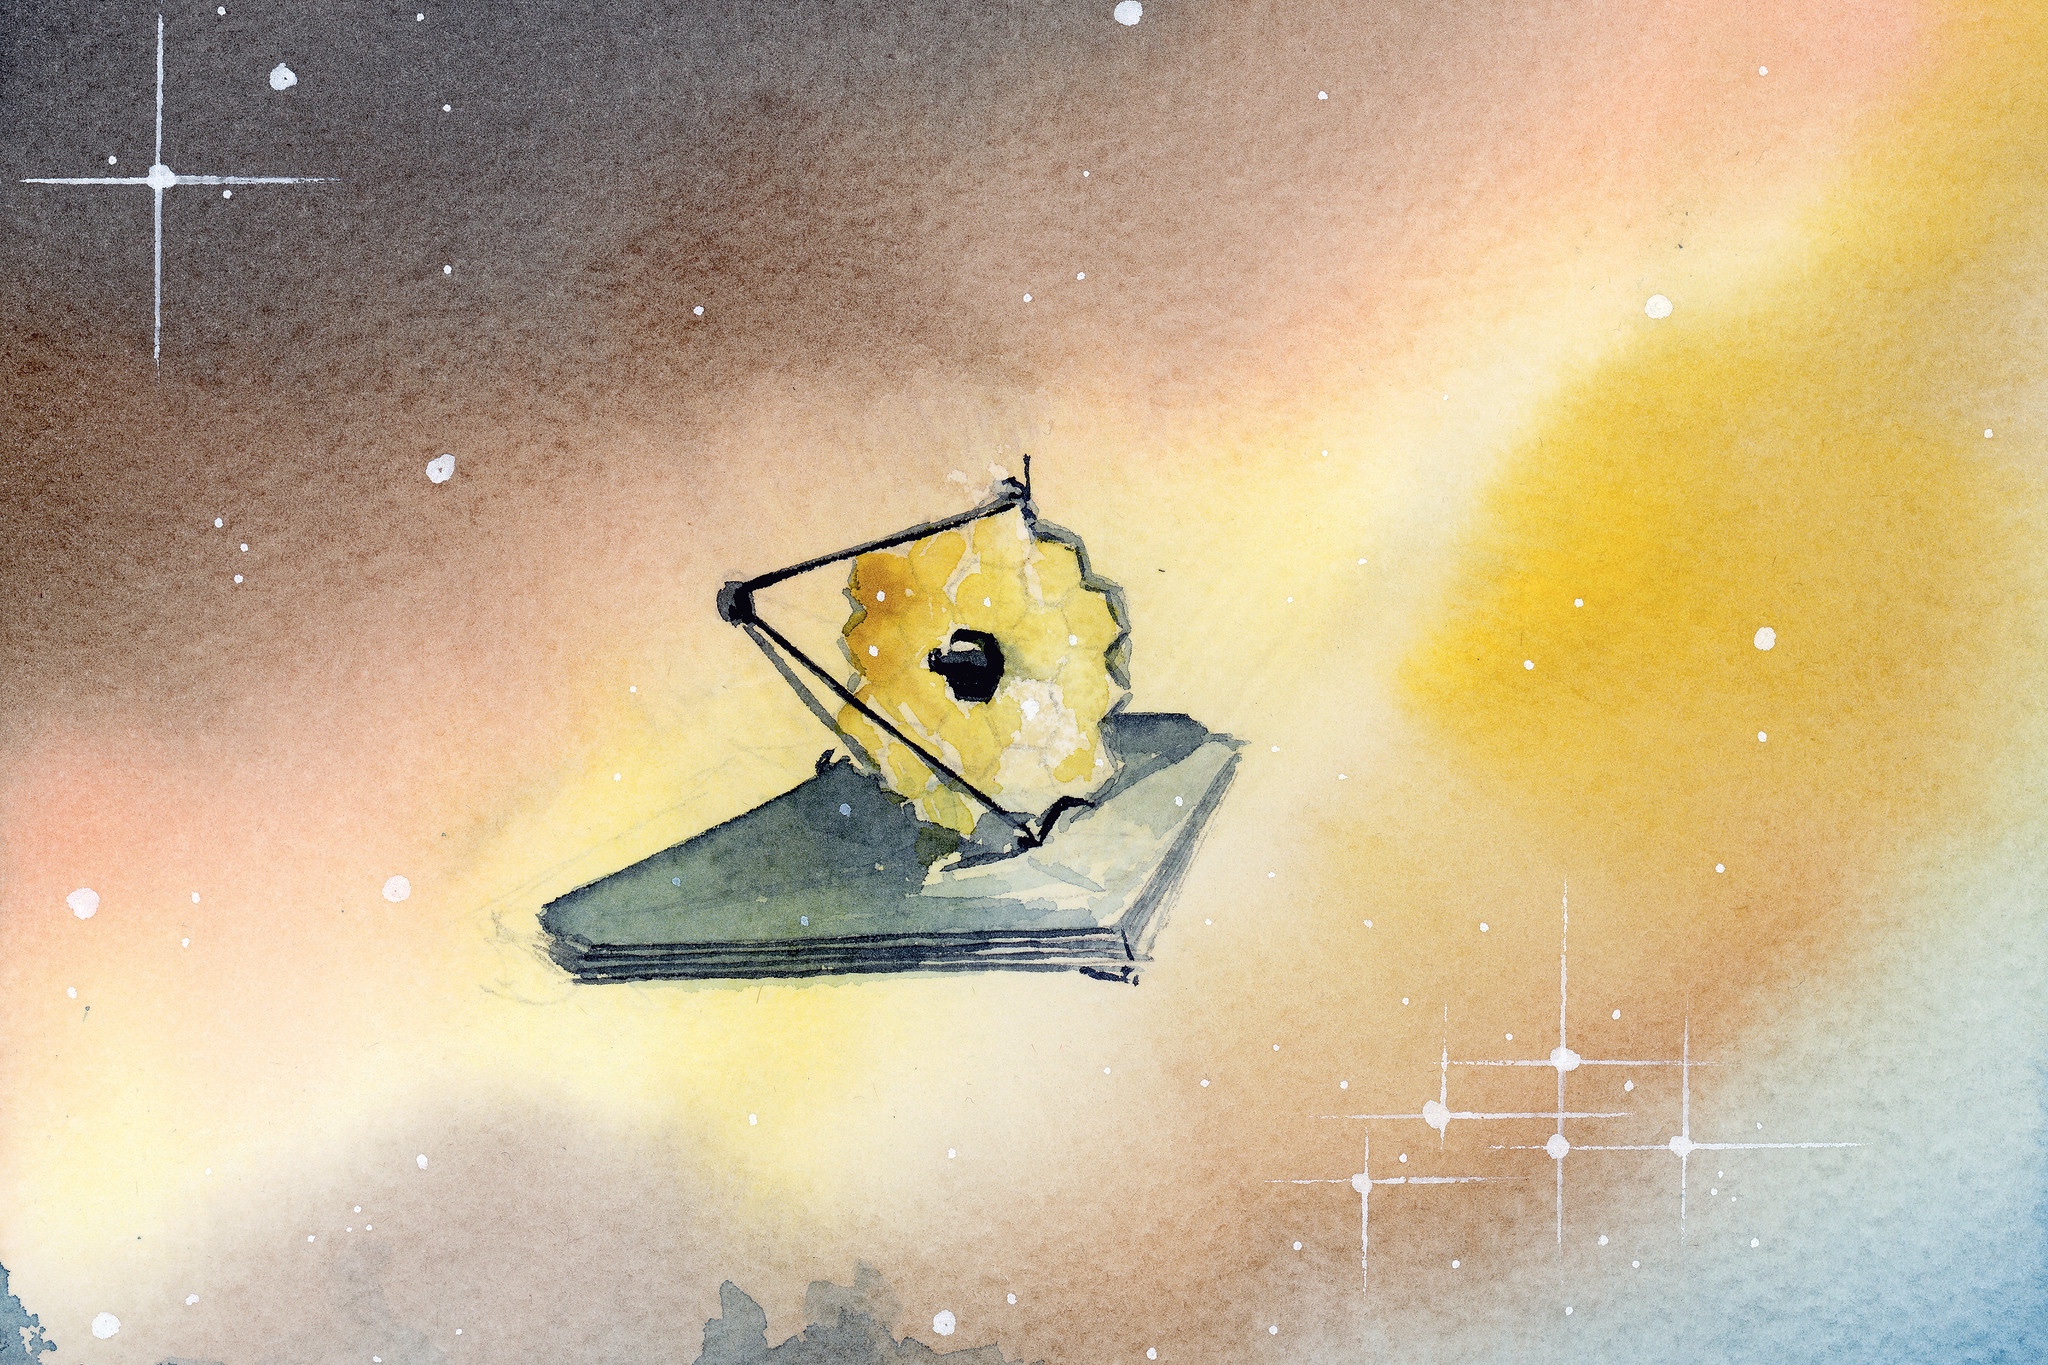 A watercolor of the James Webb Space Telescope. (Credit: P. Vuaillet)